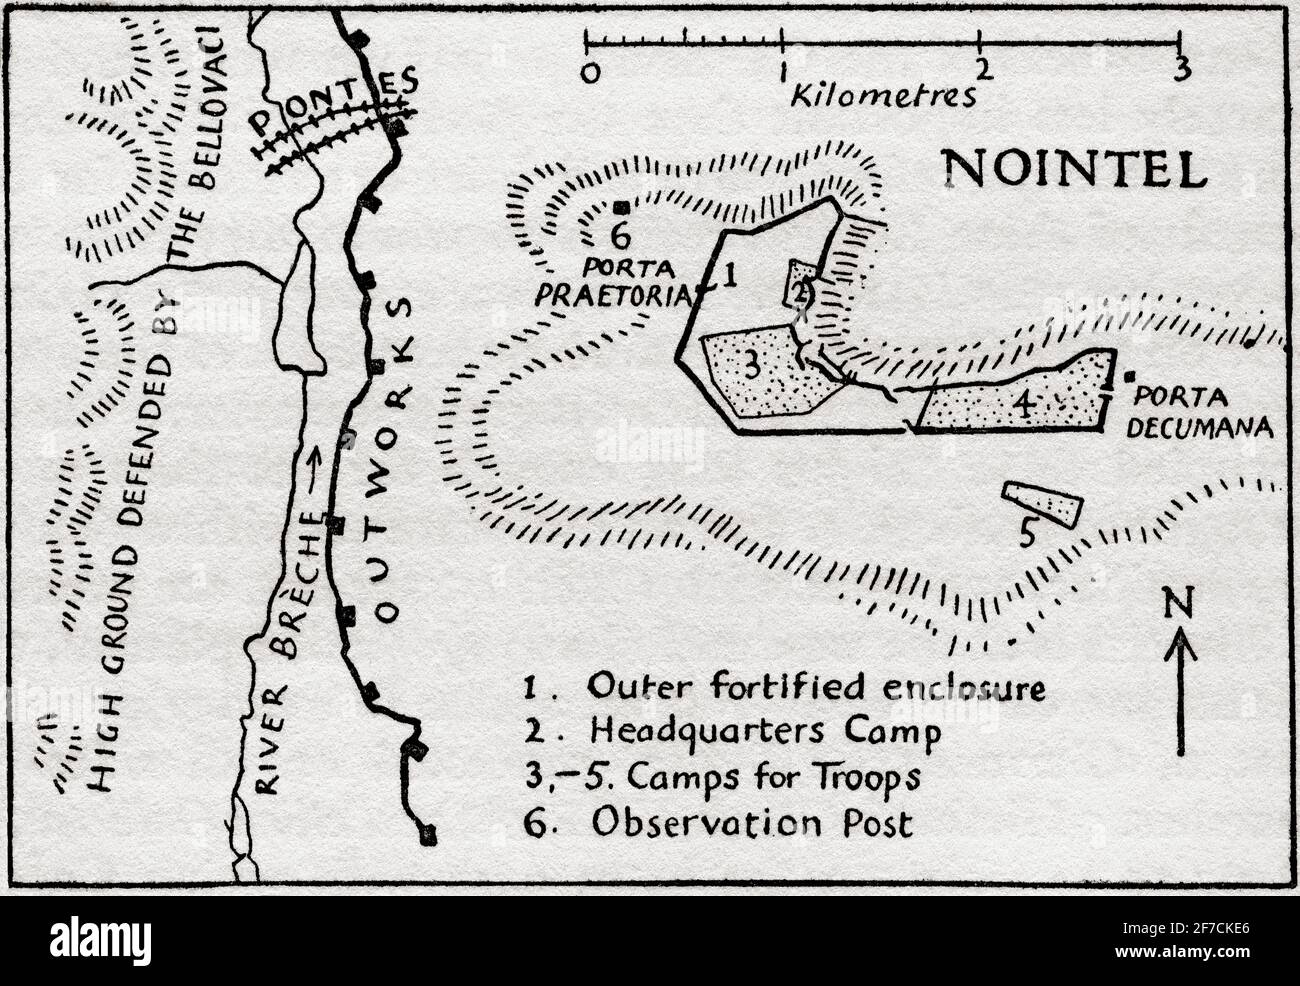 Julius Caesar's camps at Nointel, Oise, France, 51 BC, showing the outer fortified enclosure, headquarters camp, camps for troops and observation post.  After an illustration by Edgar Holloway. Stock Photo